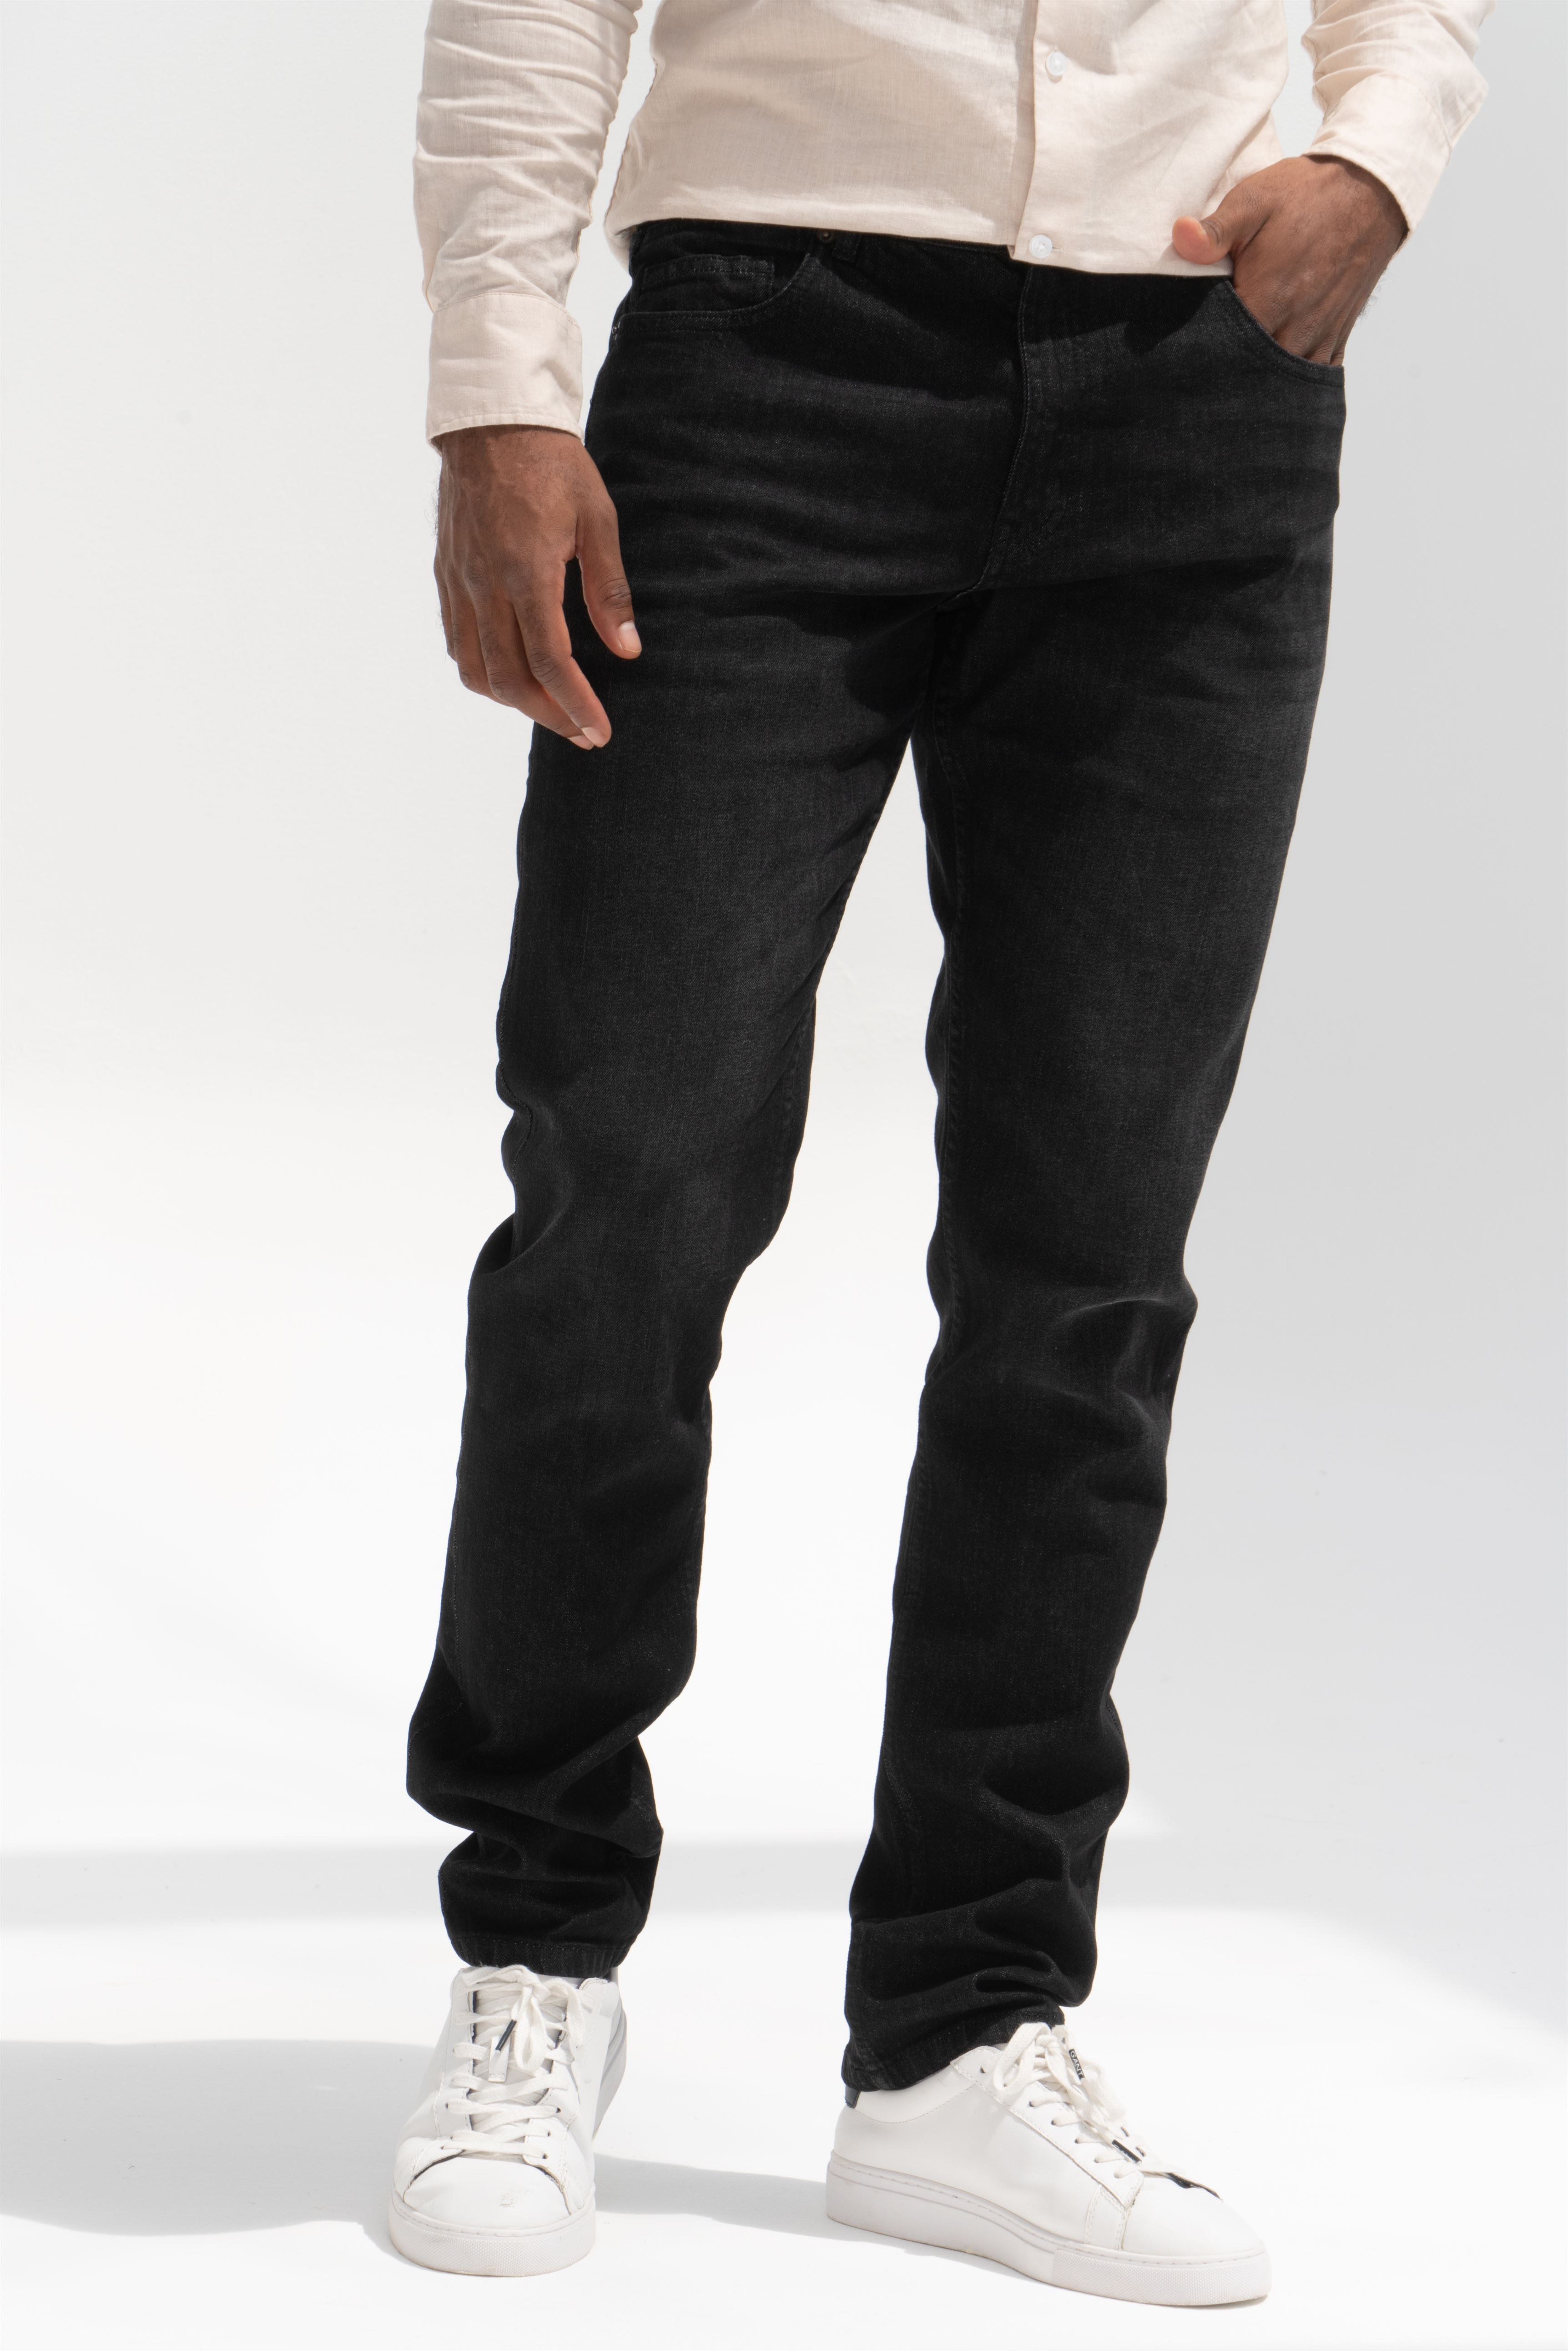 Jeans Black Casual Man